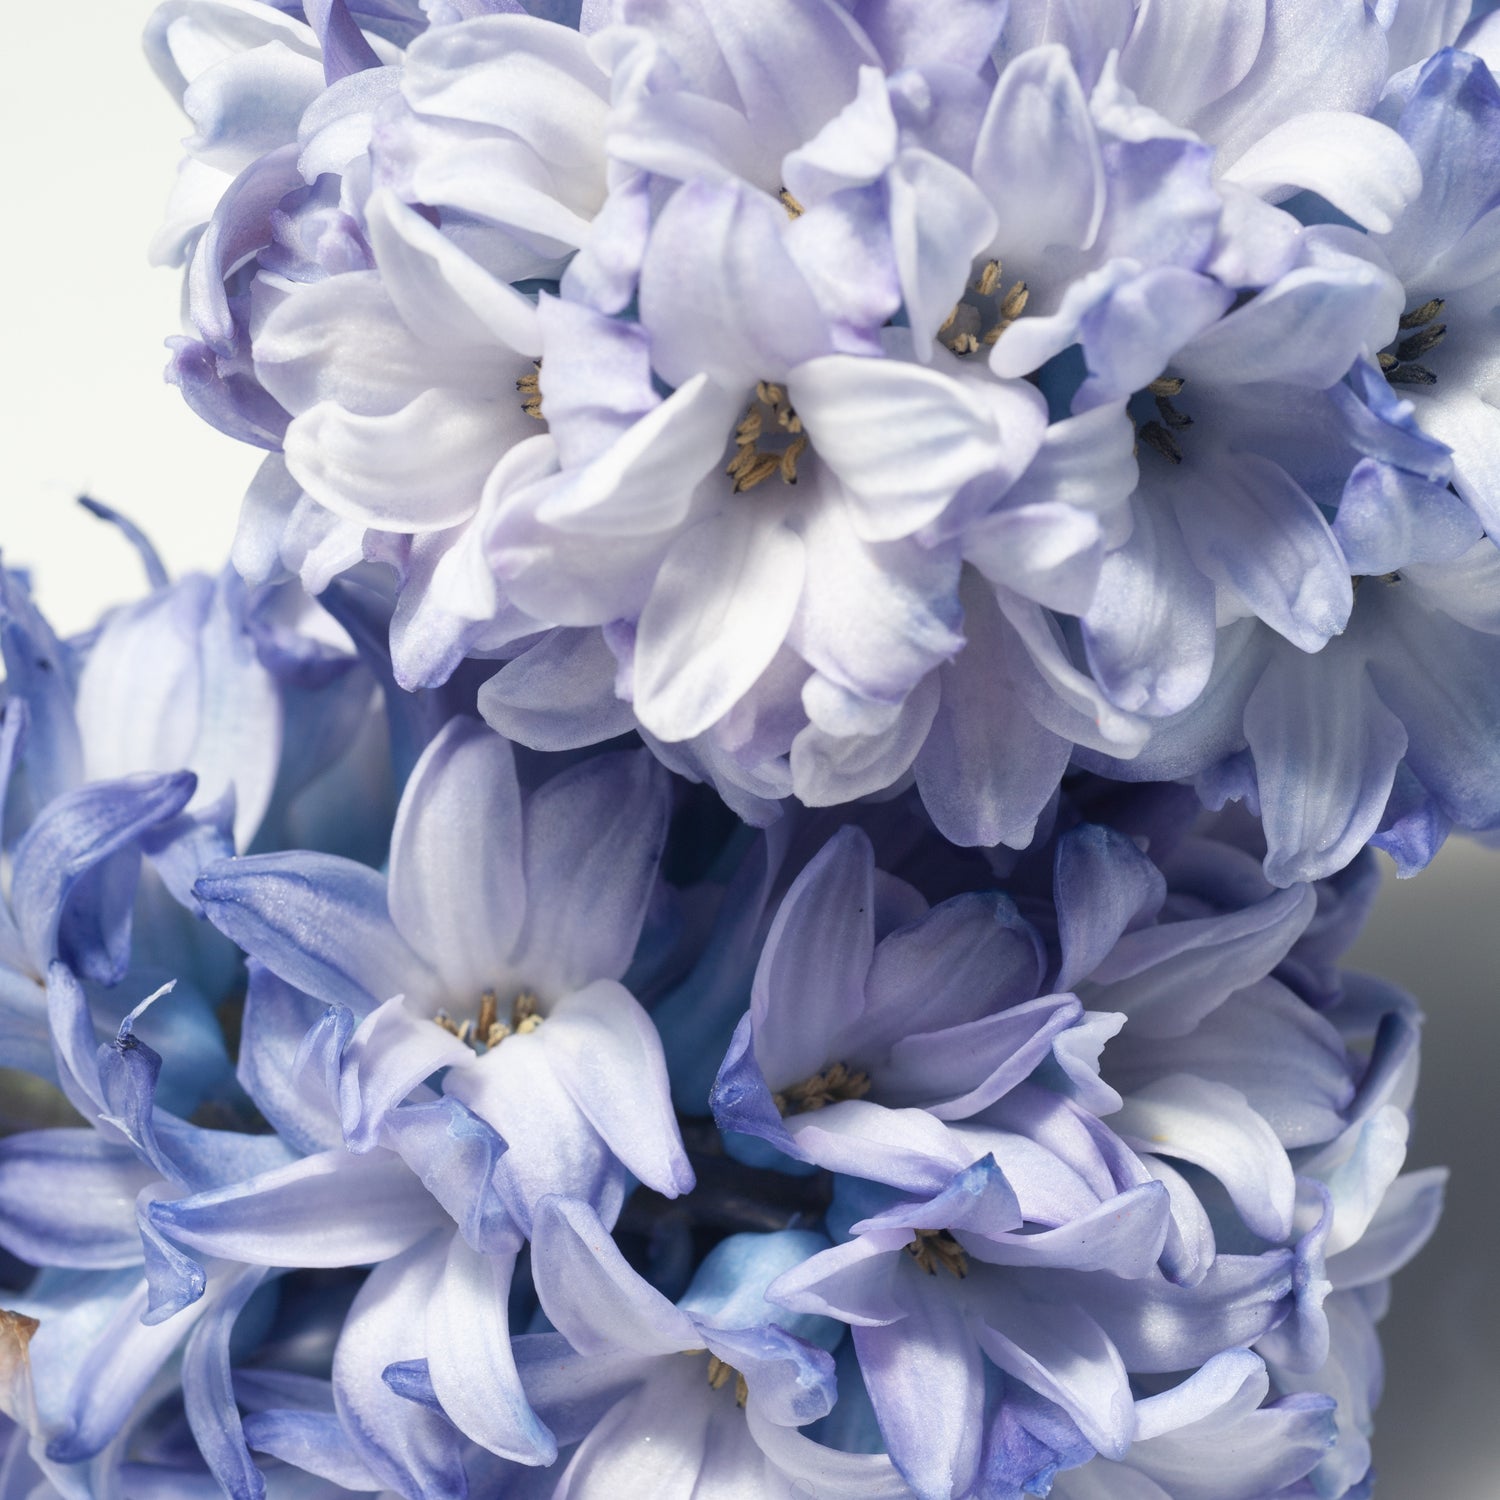 Blue hyacinth flowers on a white background, emitting the lovely fragrance of the Lilac Petal Long-Lasting Scented Jar Candle (14 oz) by Tuscany Candle.